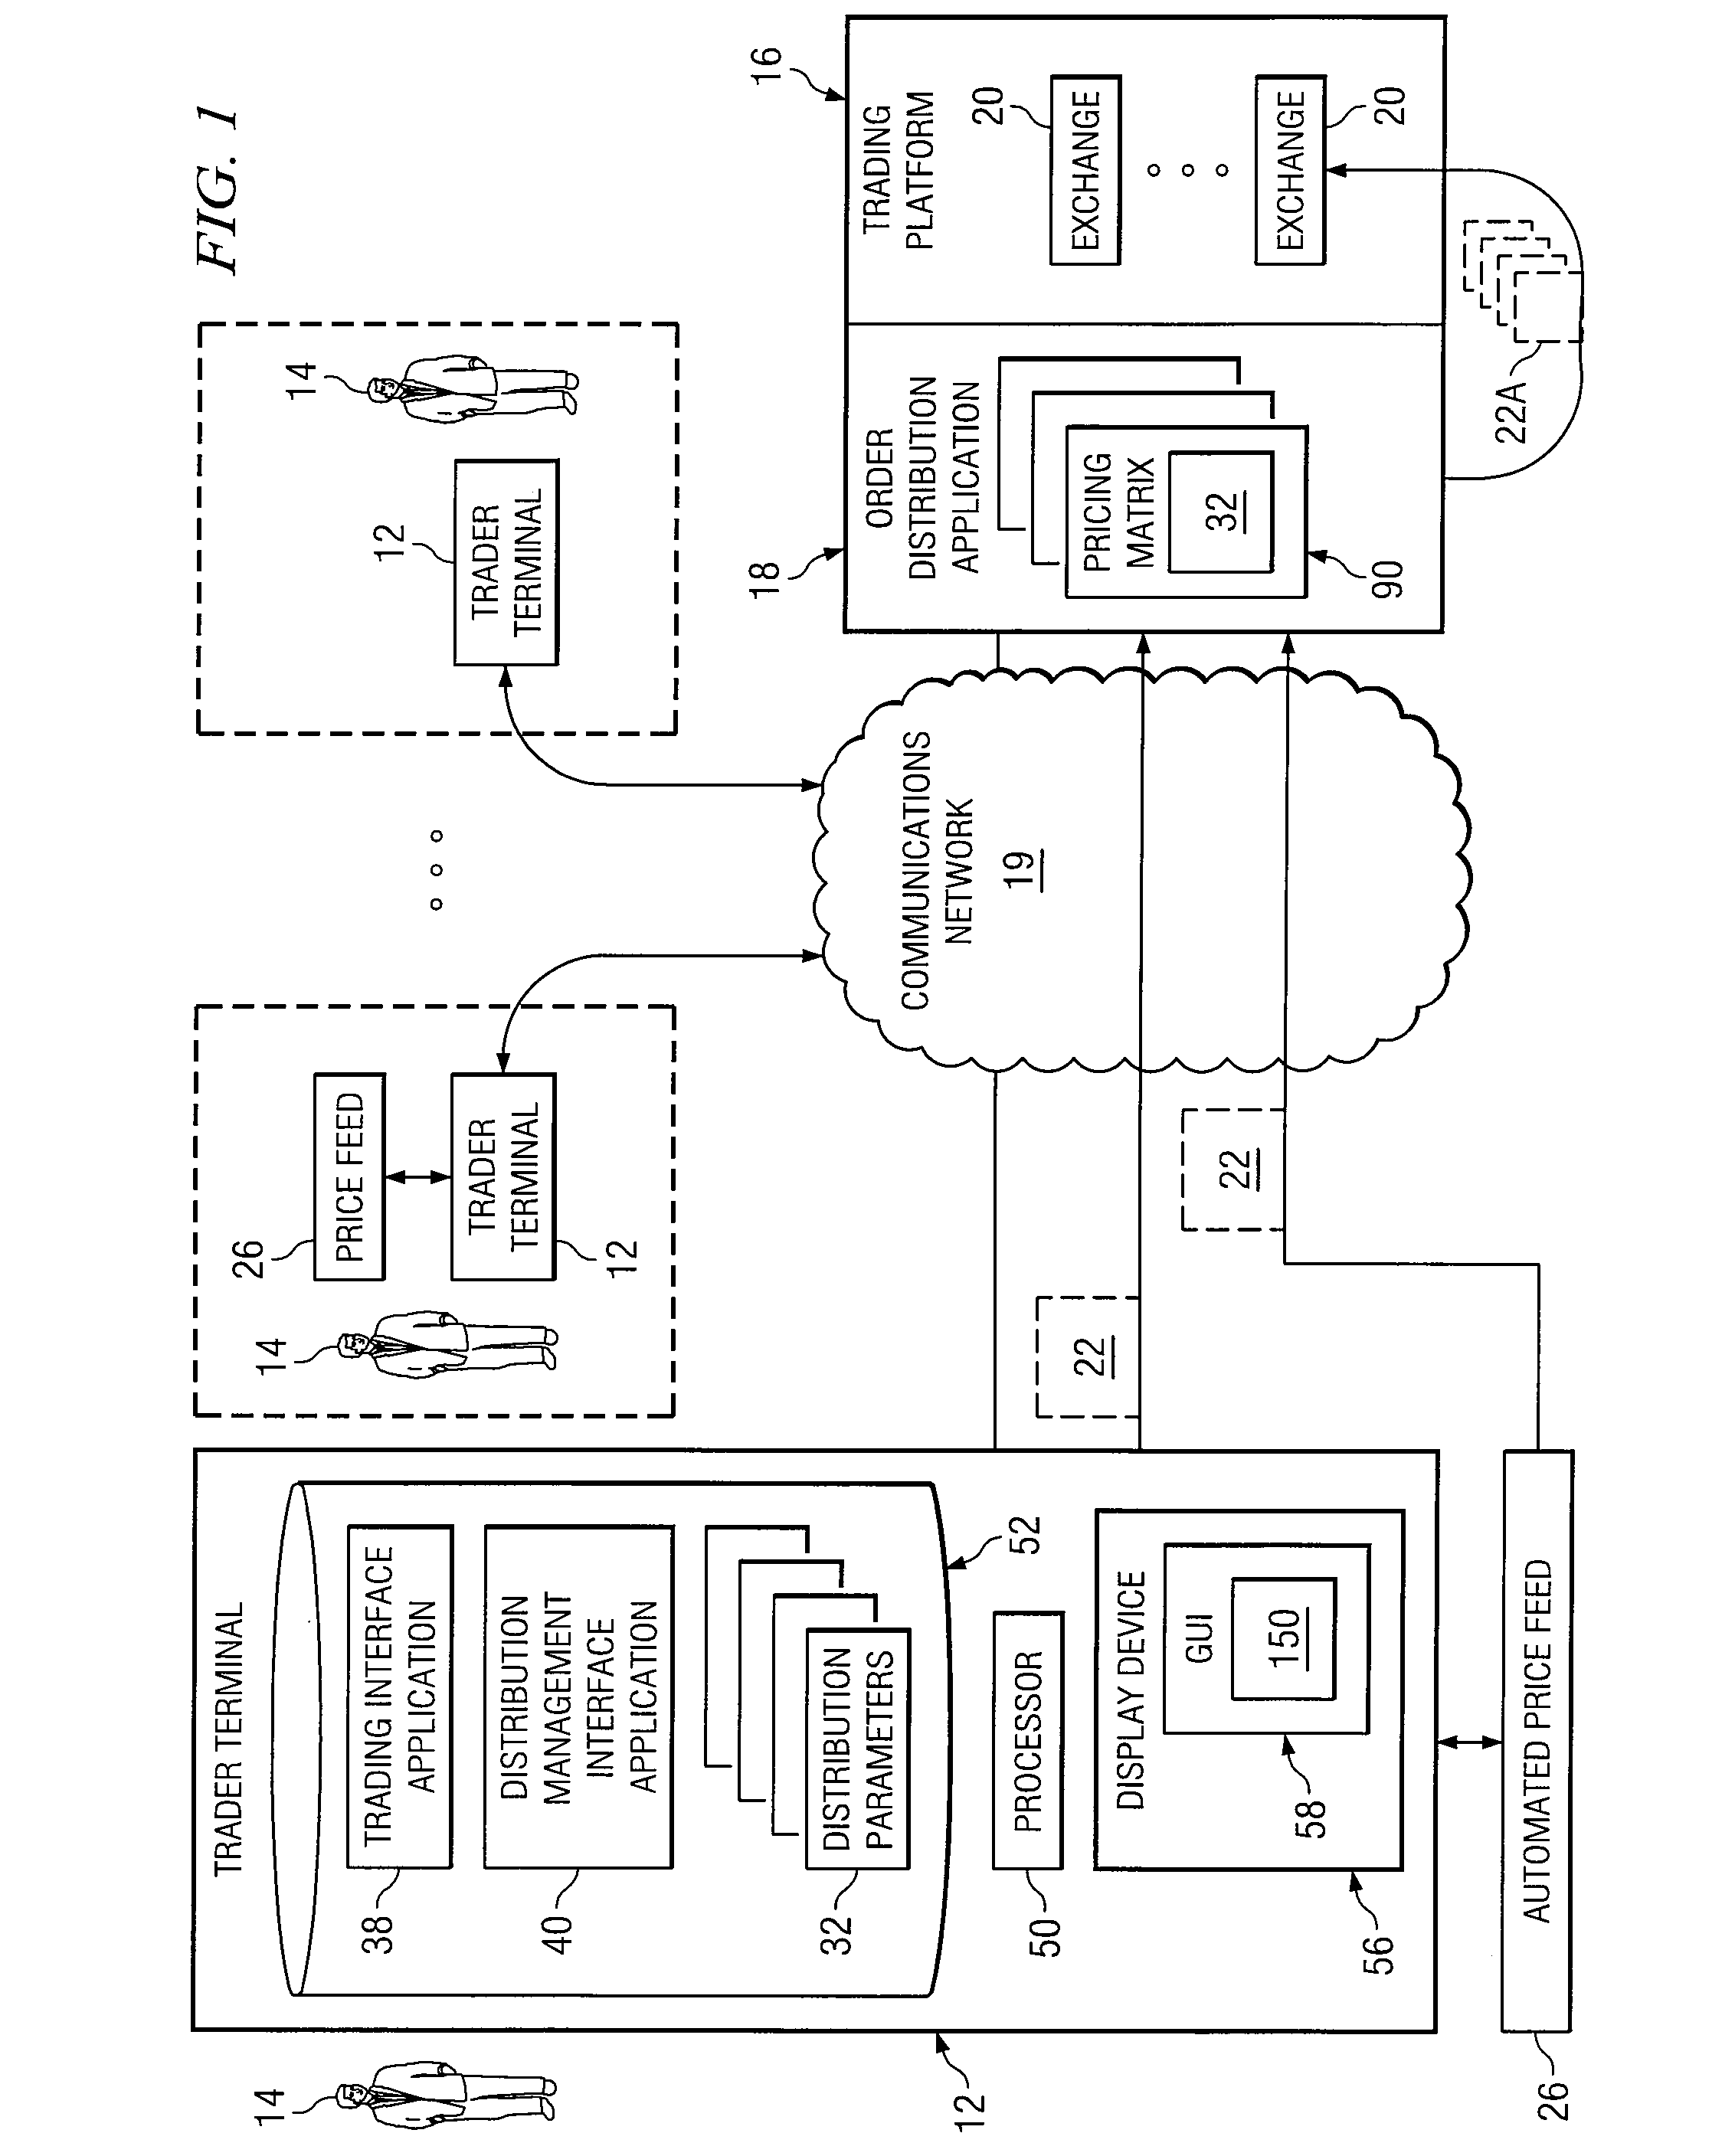 System and method for automatically distributing a trading order over a range of prices